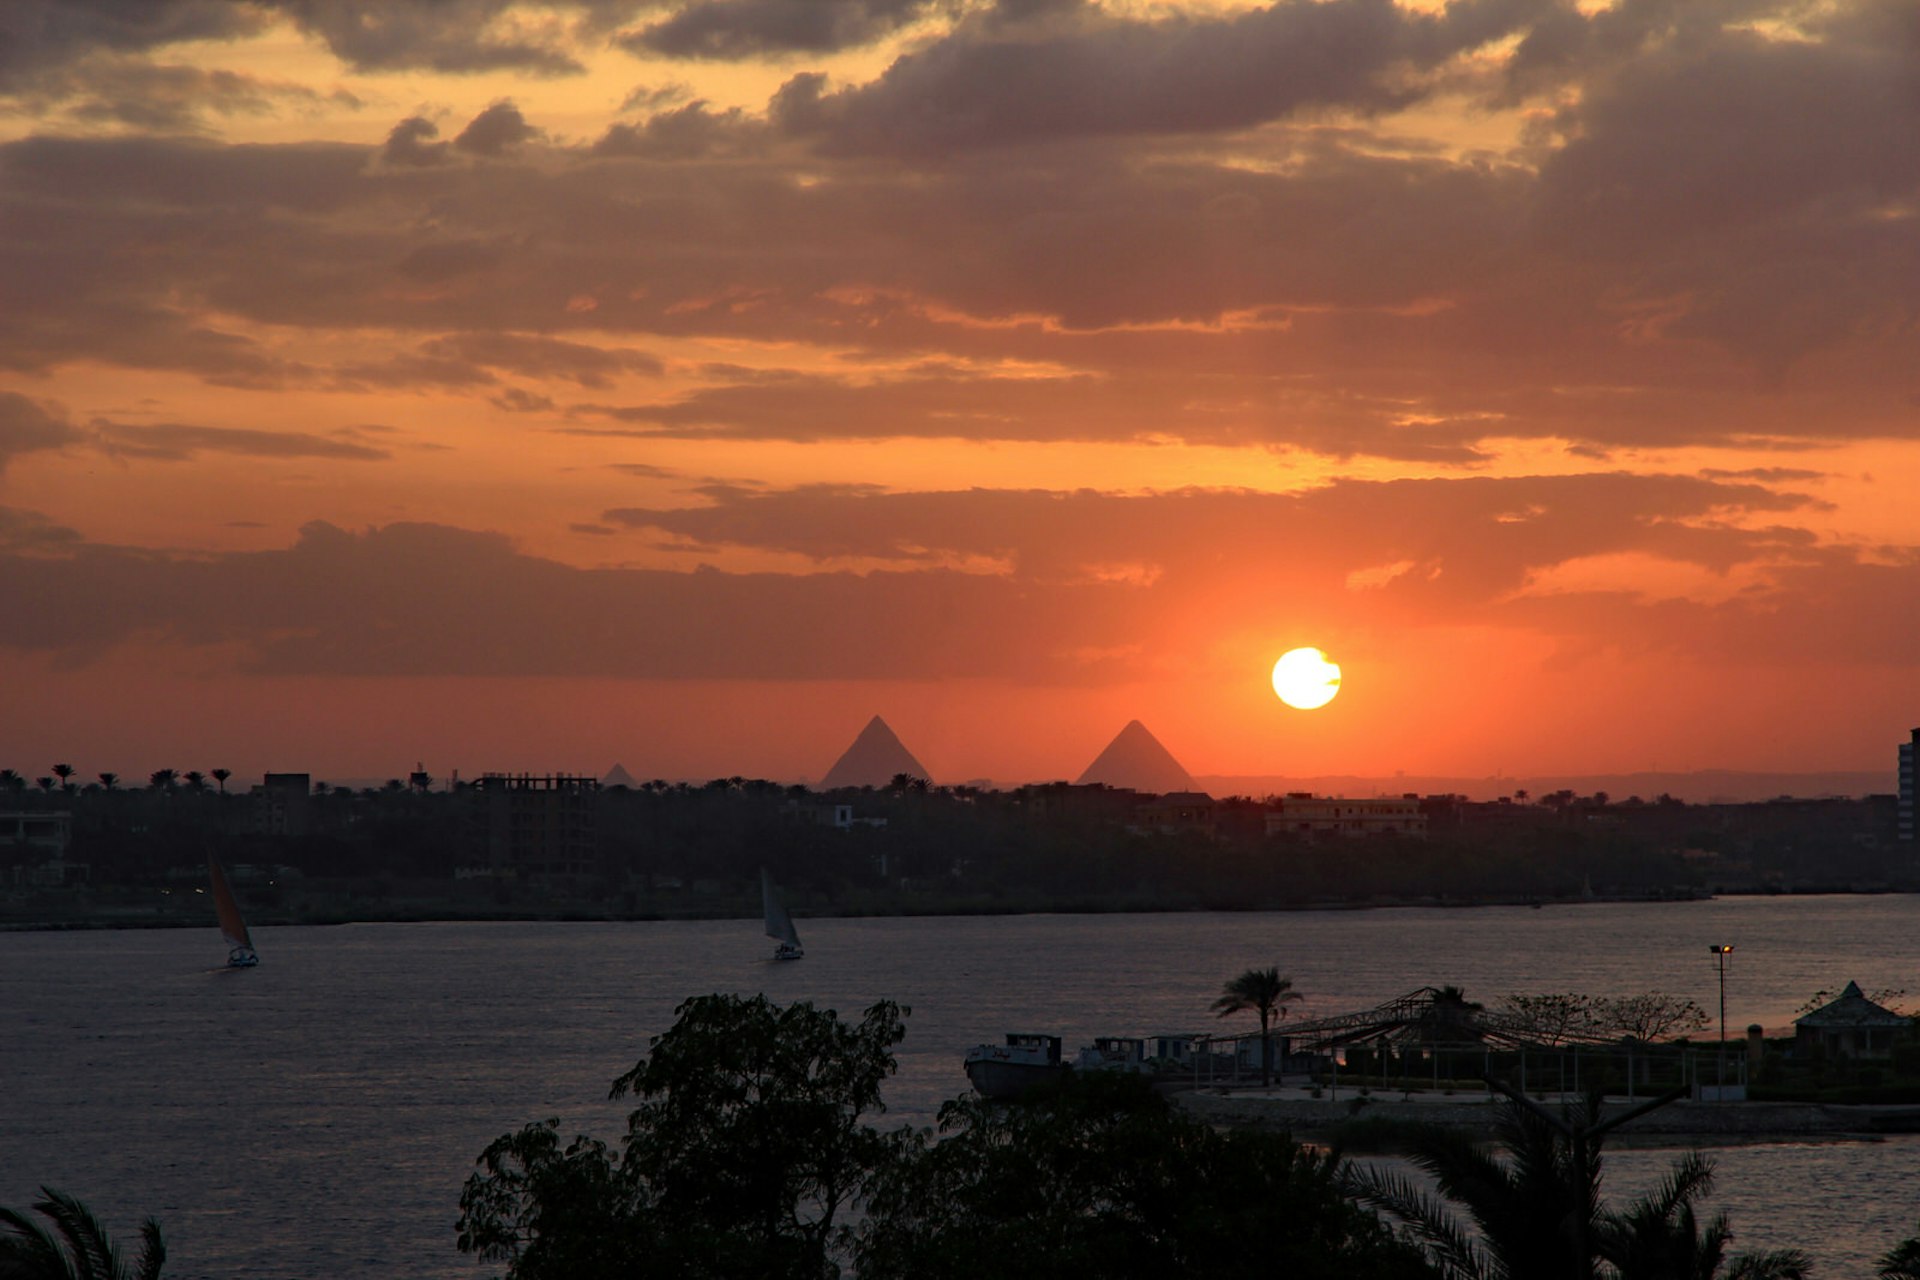 Dramatic fiery red and orange sunset over the River Nile with feluccas calmly sailing and the magnificent Giza pyramids in the background. View from Maadi, Cairo, Egypt. Image by Harry Green / Shutterstock